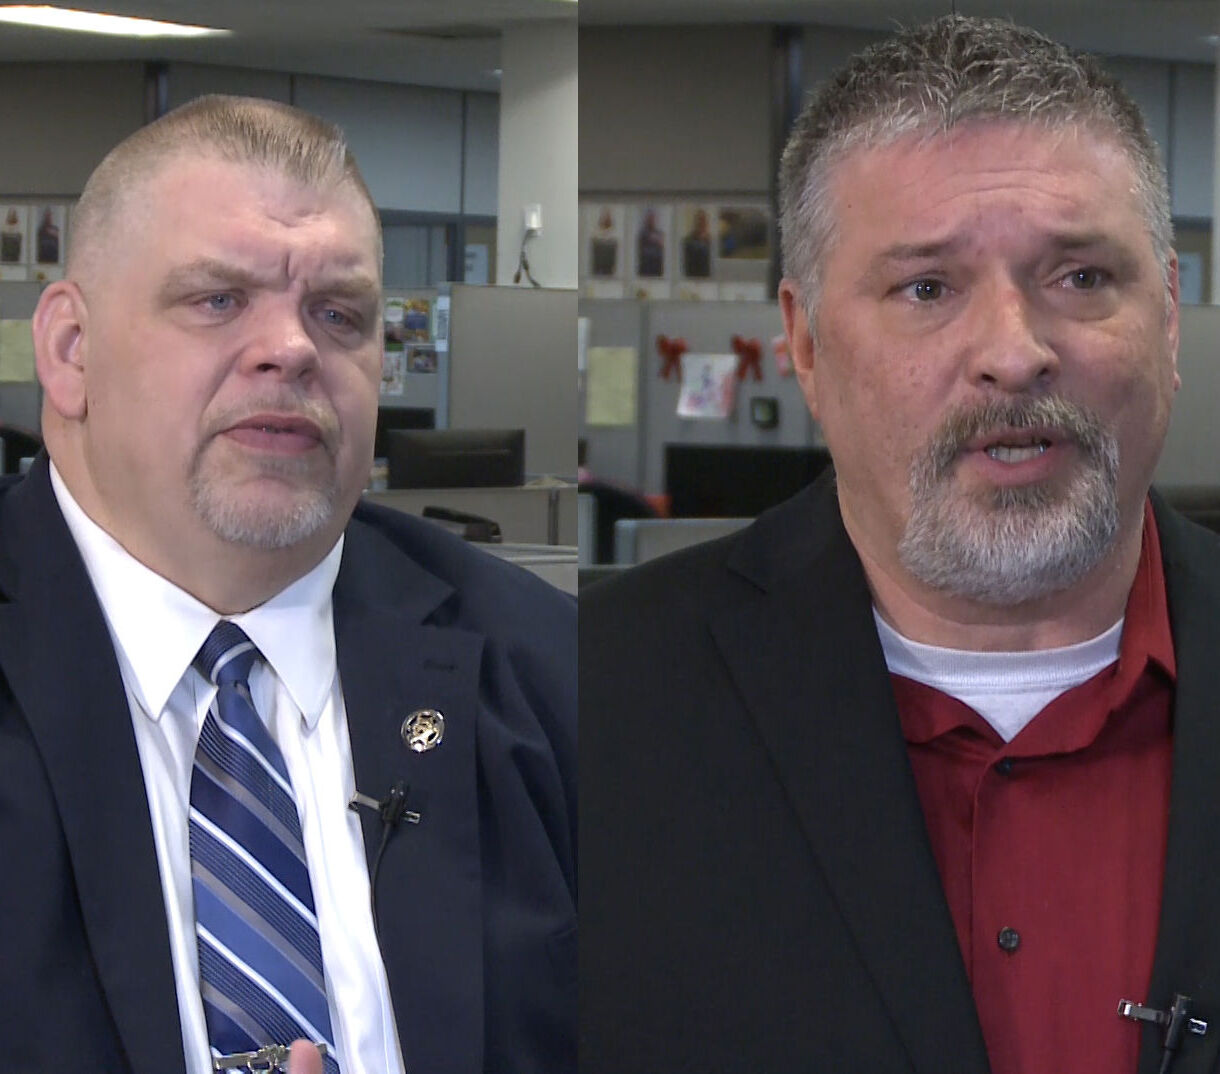 Bill Puett or Keith Dudley for Buchanan County sheriff?